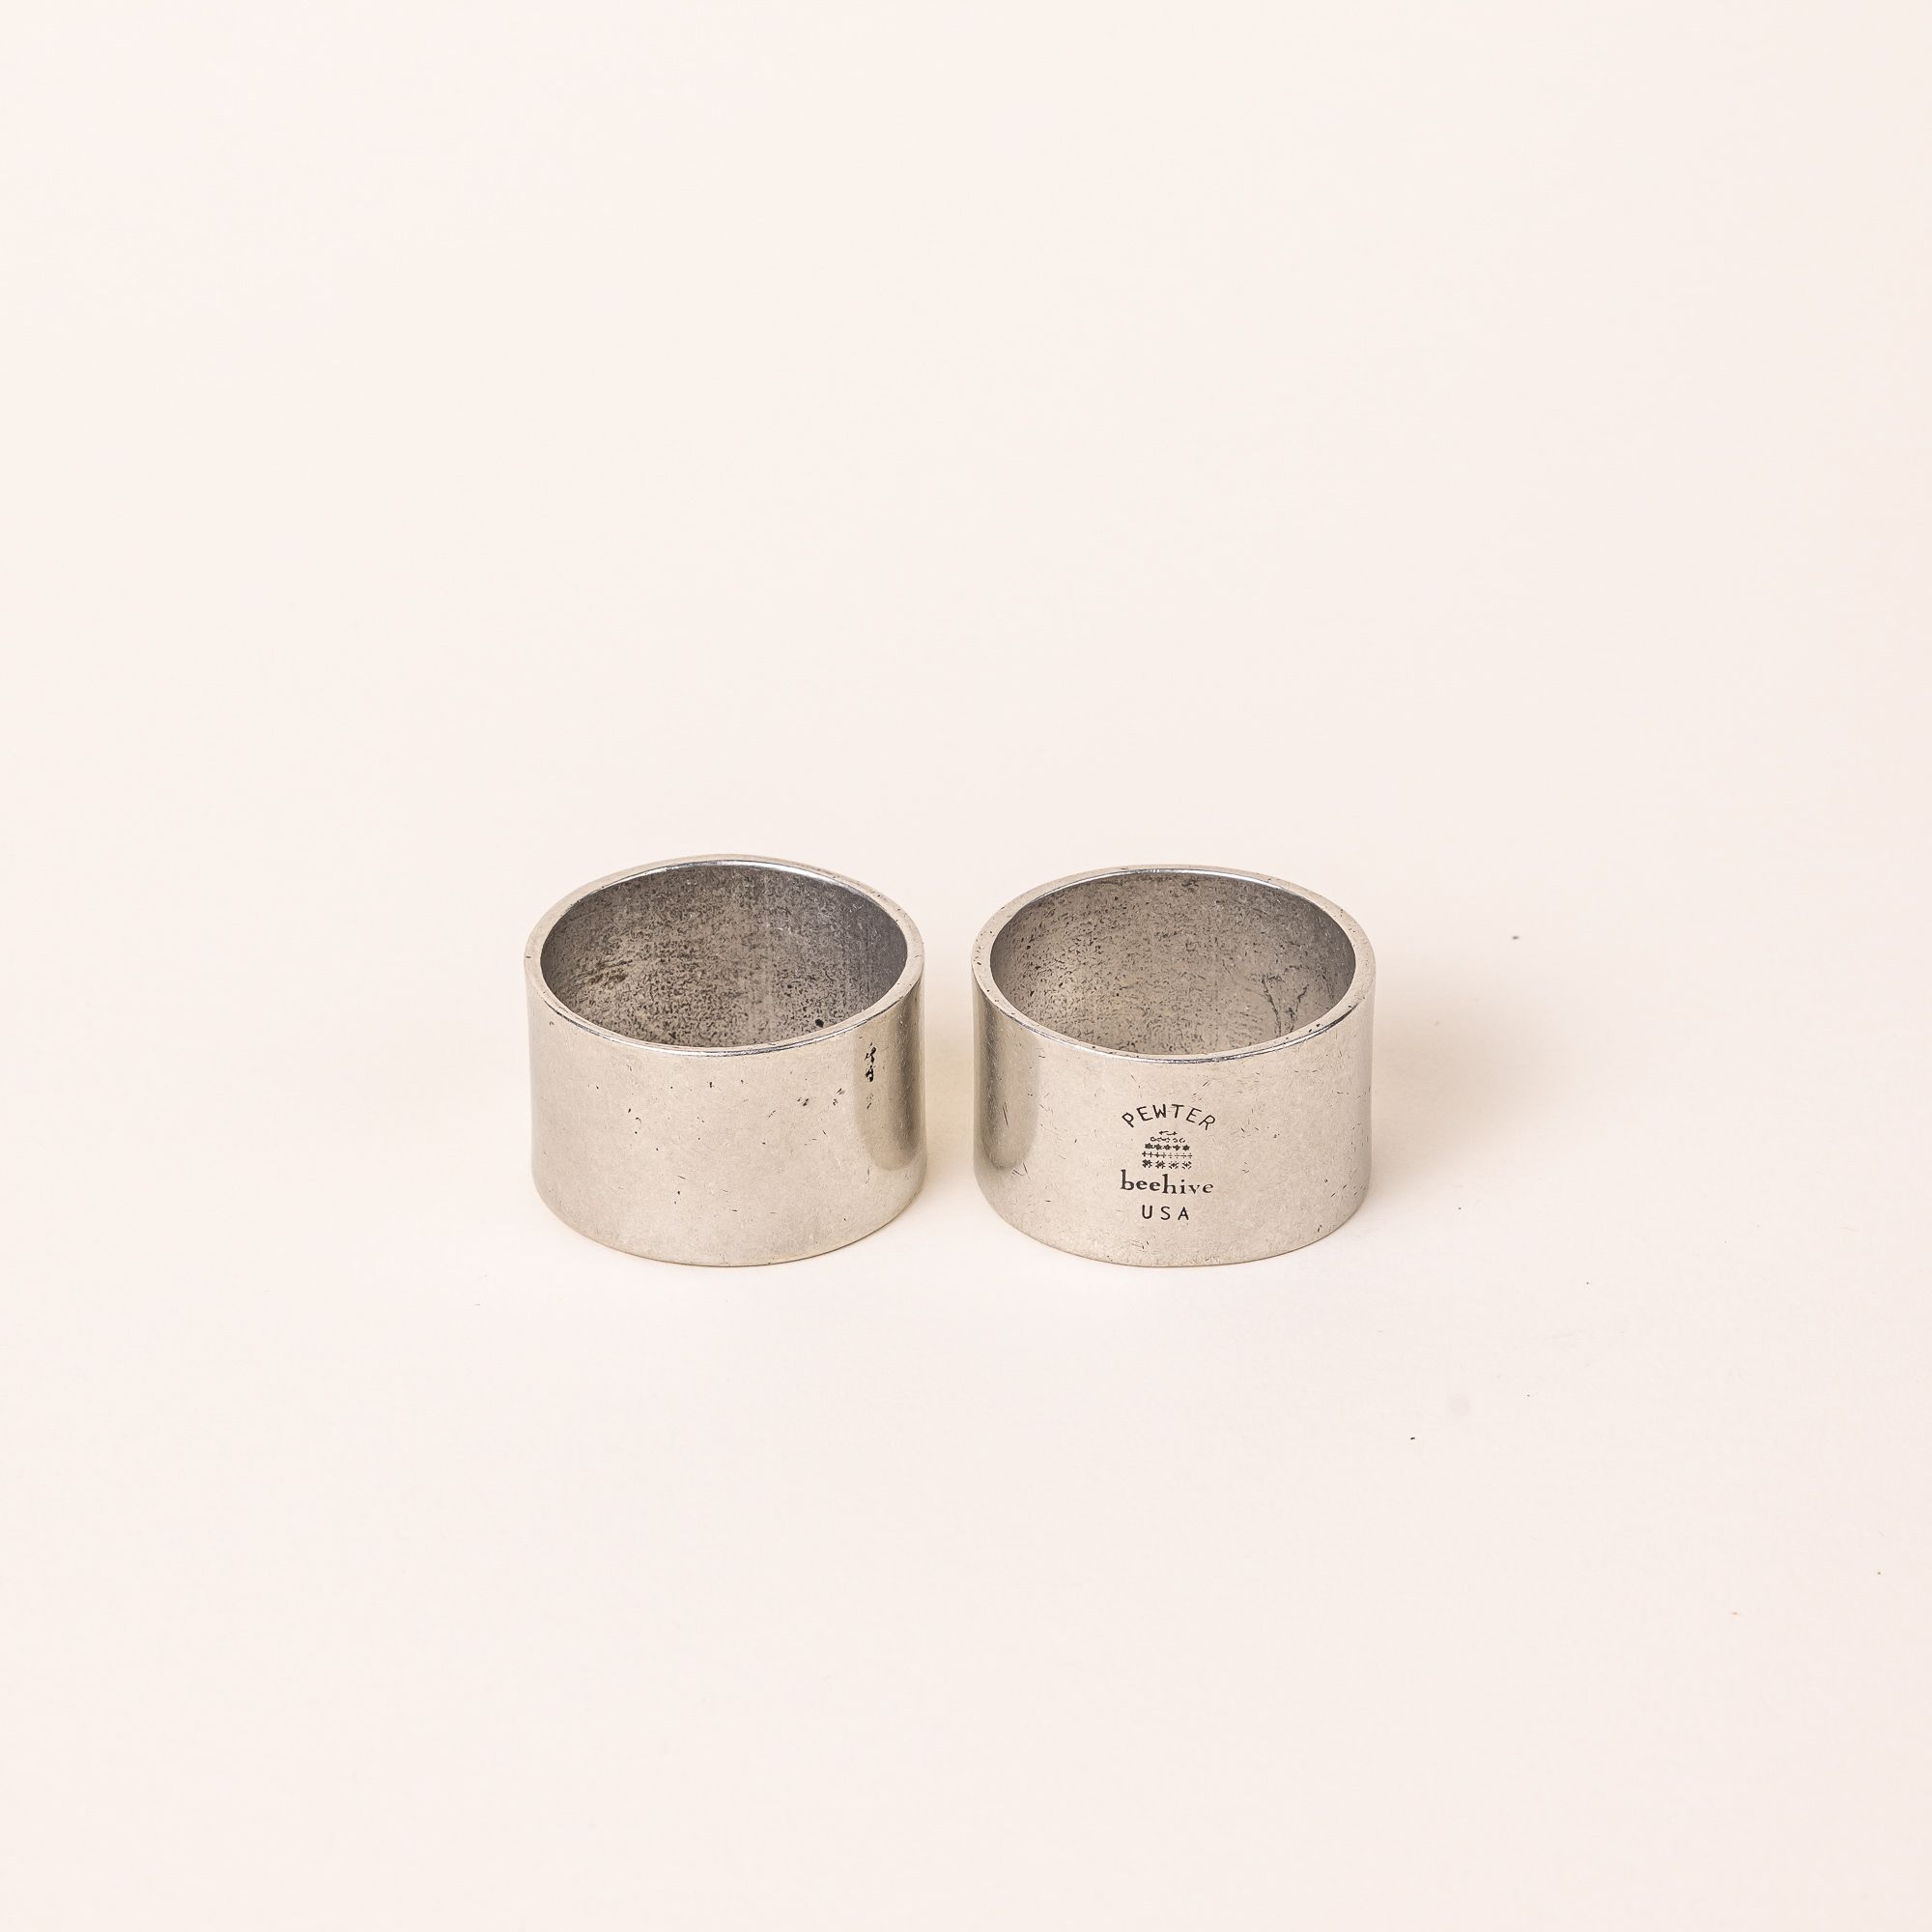 Two simple silver pewter napkin rings sitting together - the right has the maker's stamp.